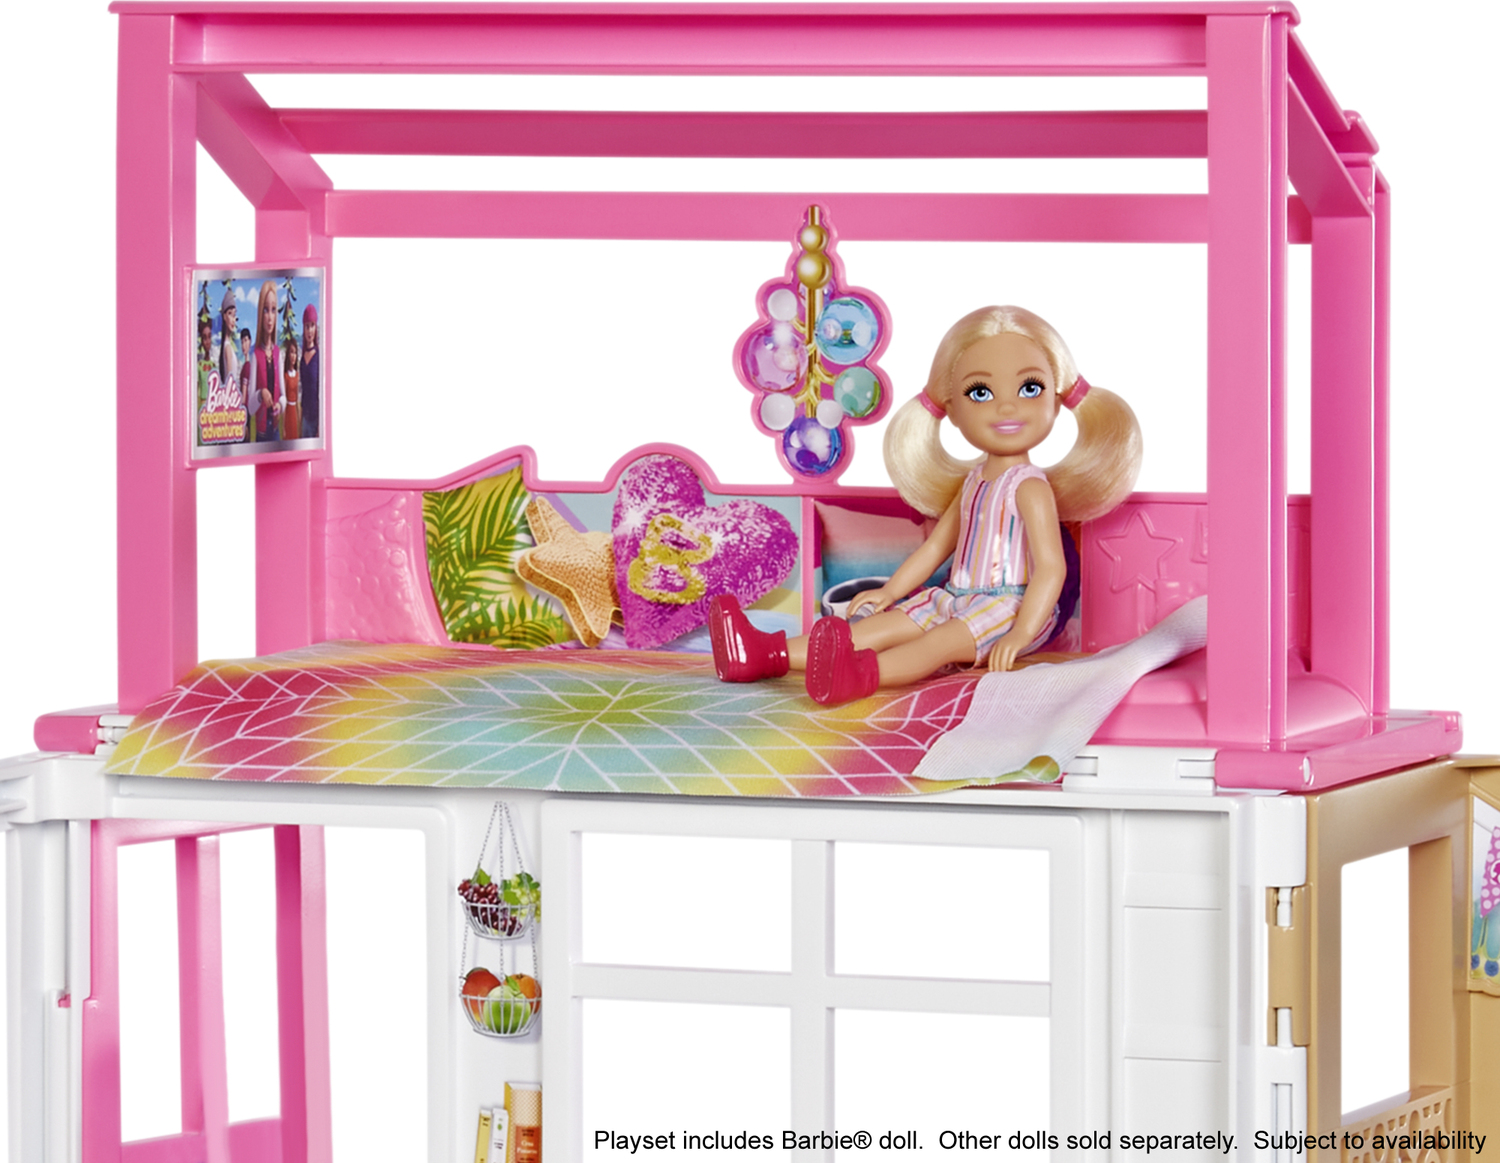 Barbie Vacation House Doll And Playset - The Toy Box Hanover